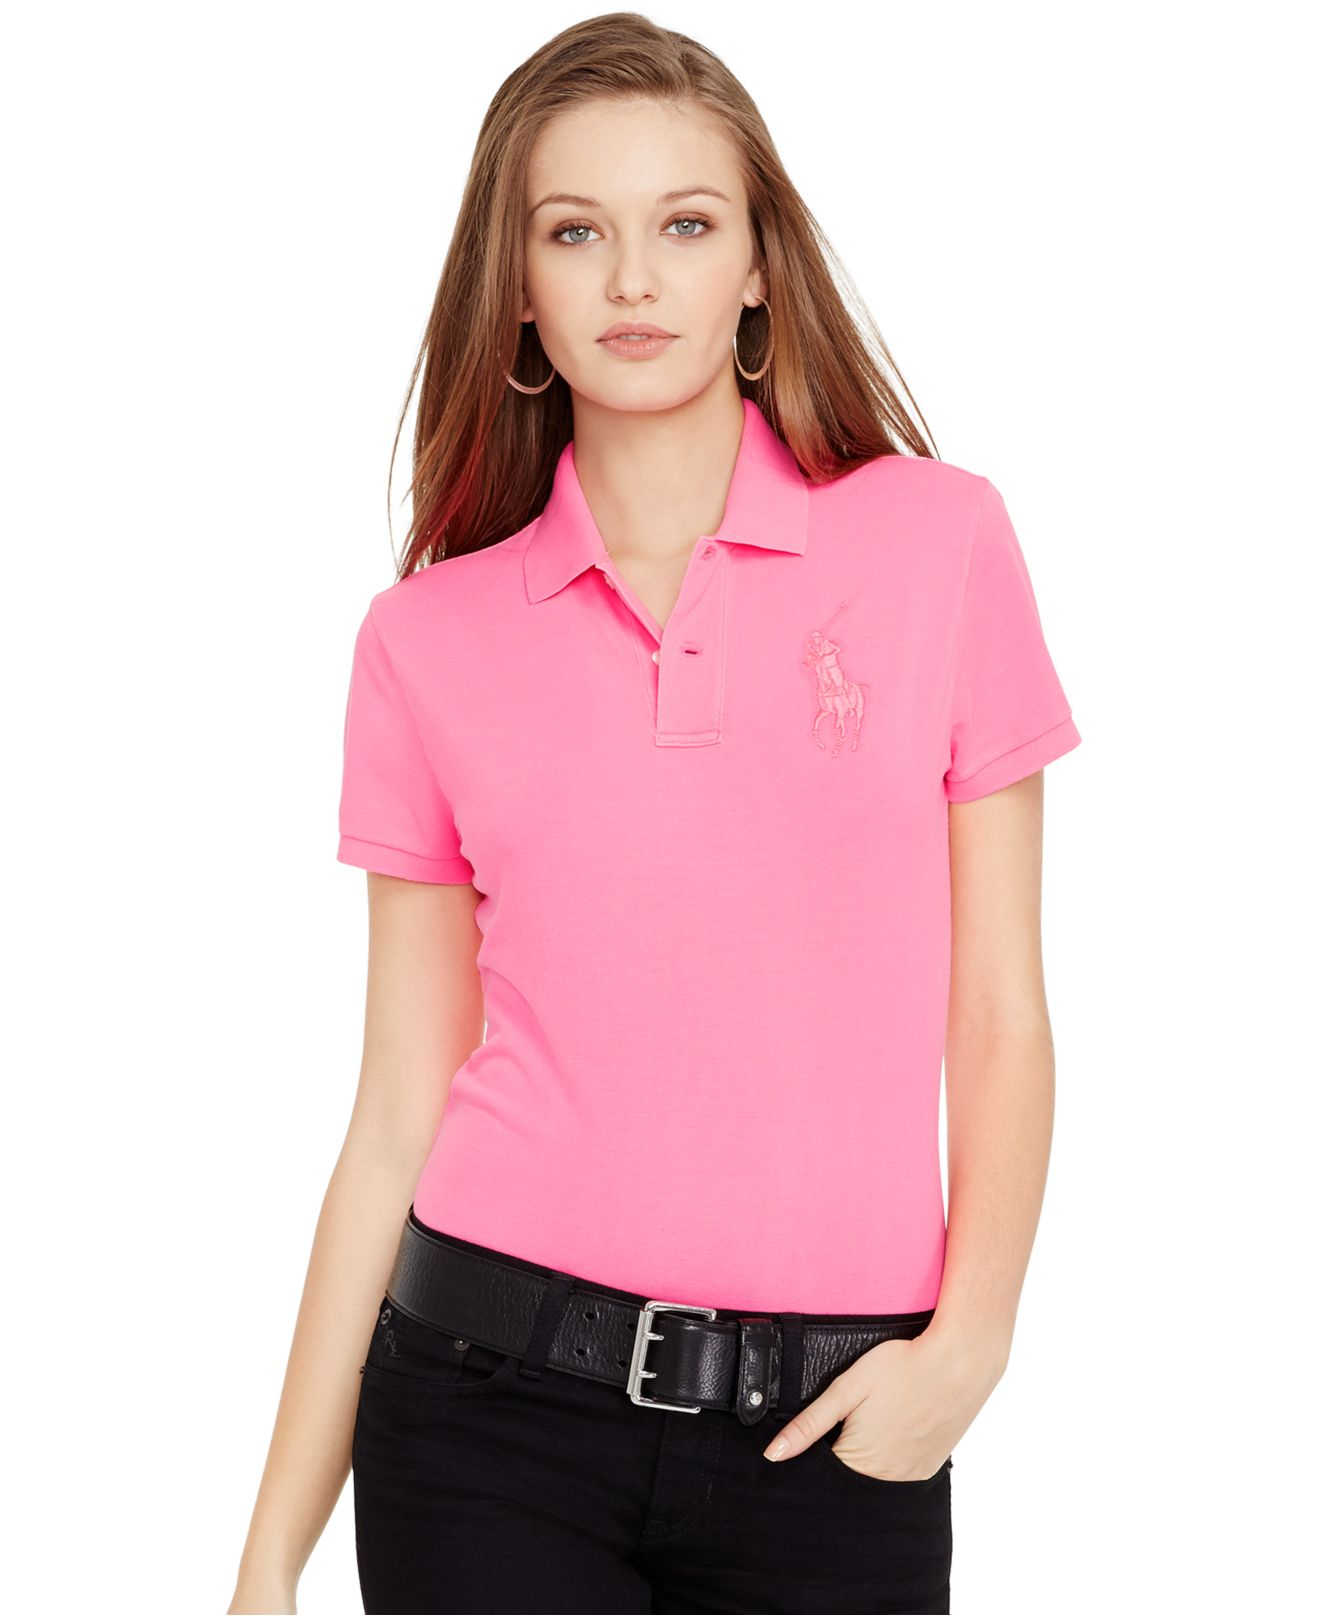 Lyst - Polo Ralph Lauren Pink Pony Polo Shirt in Pink